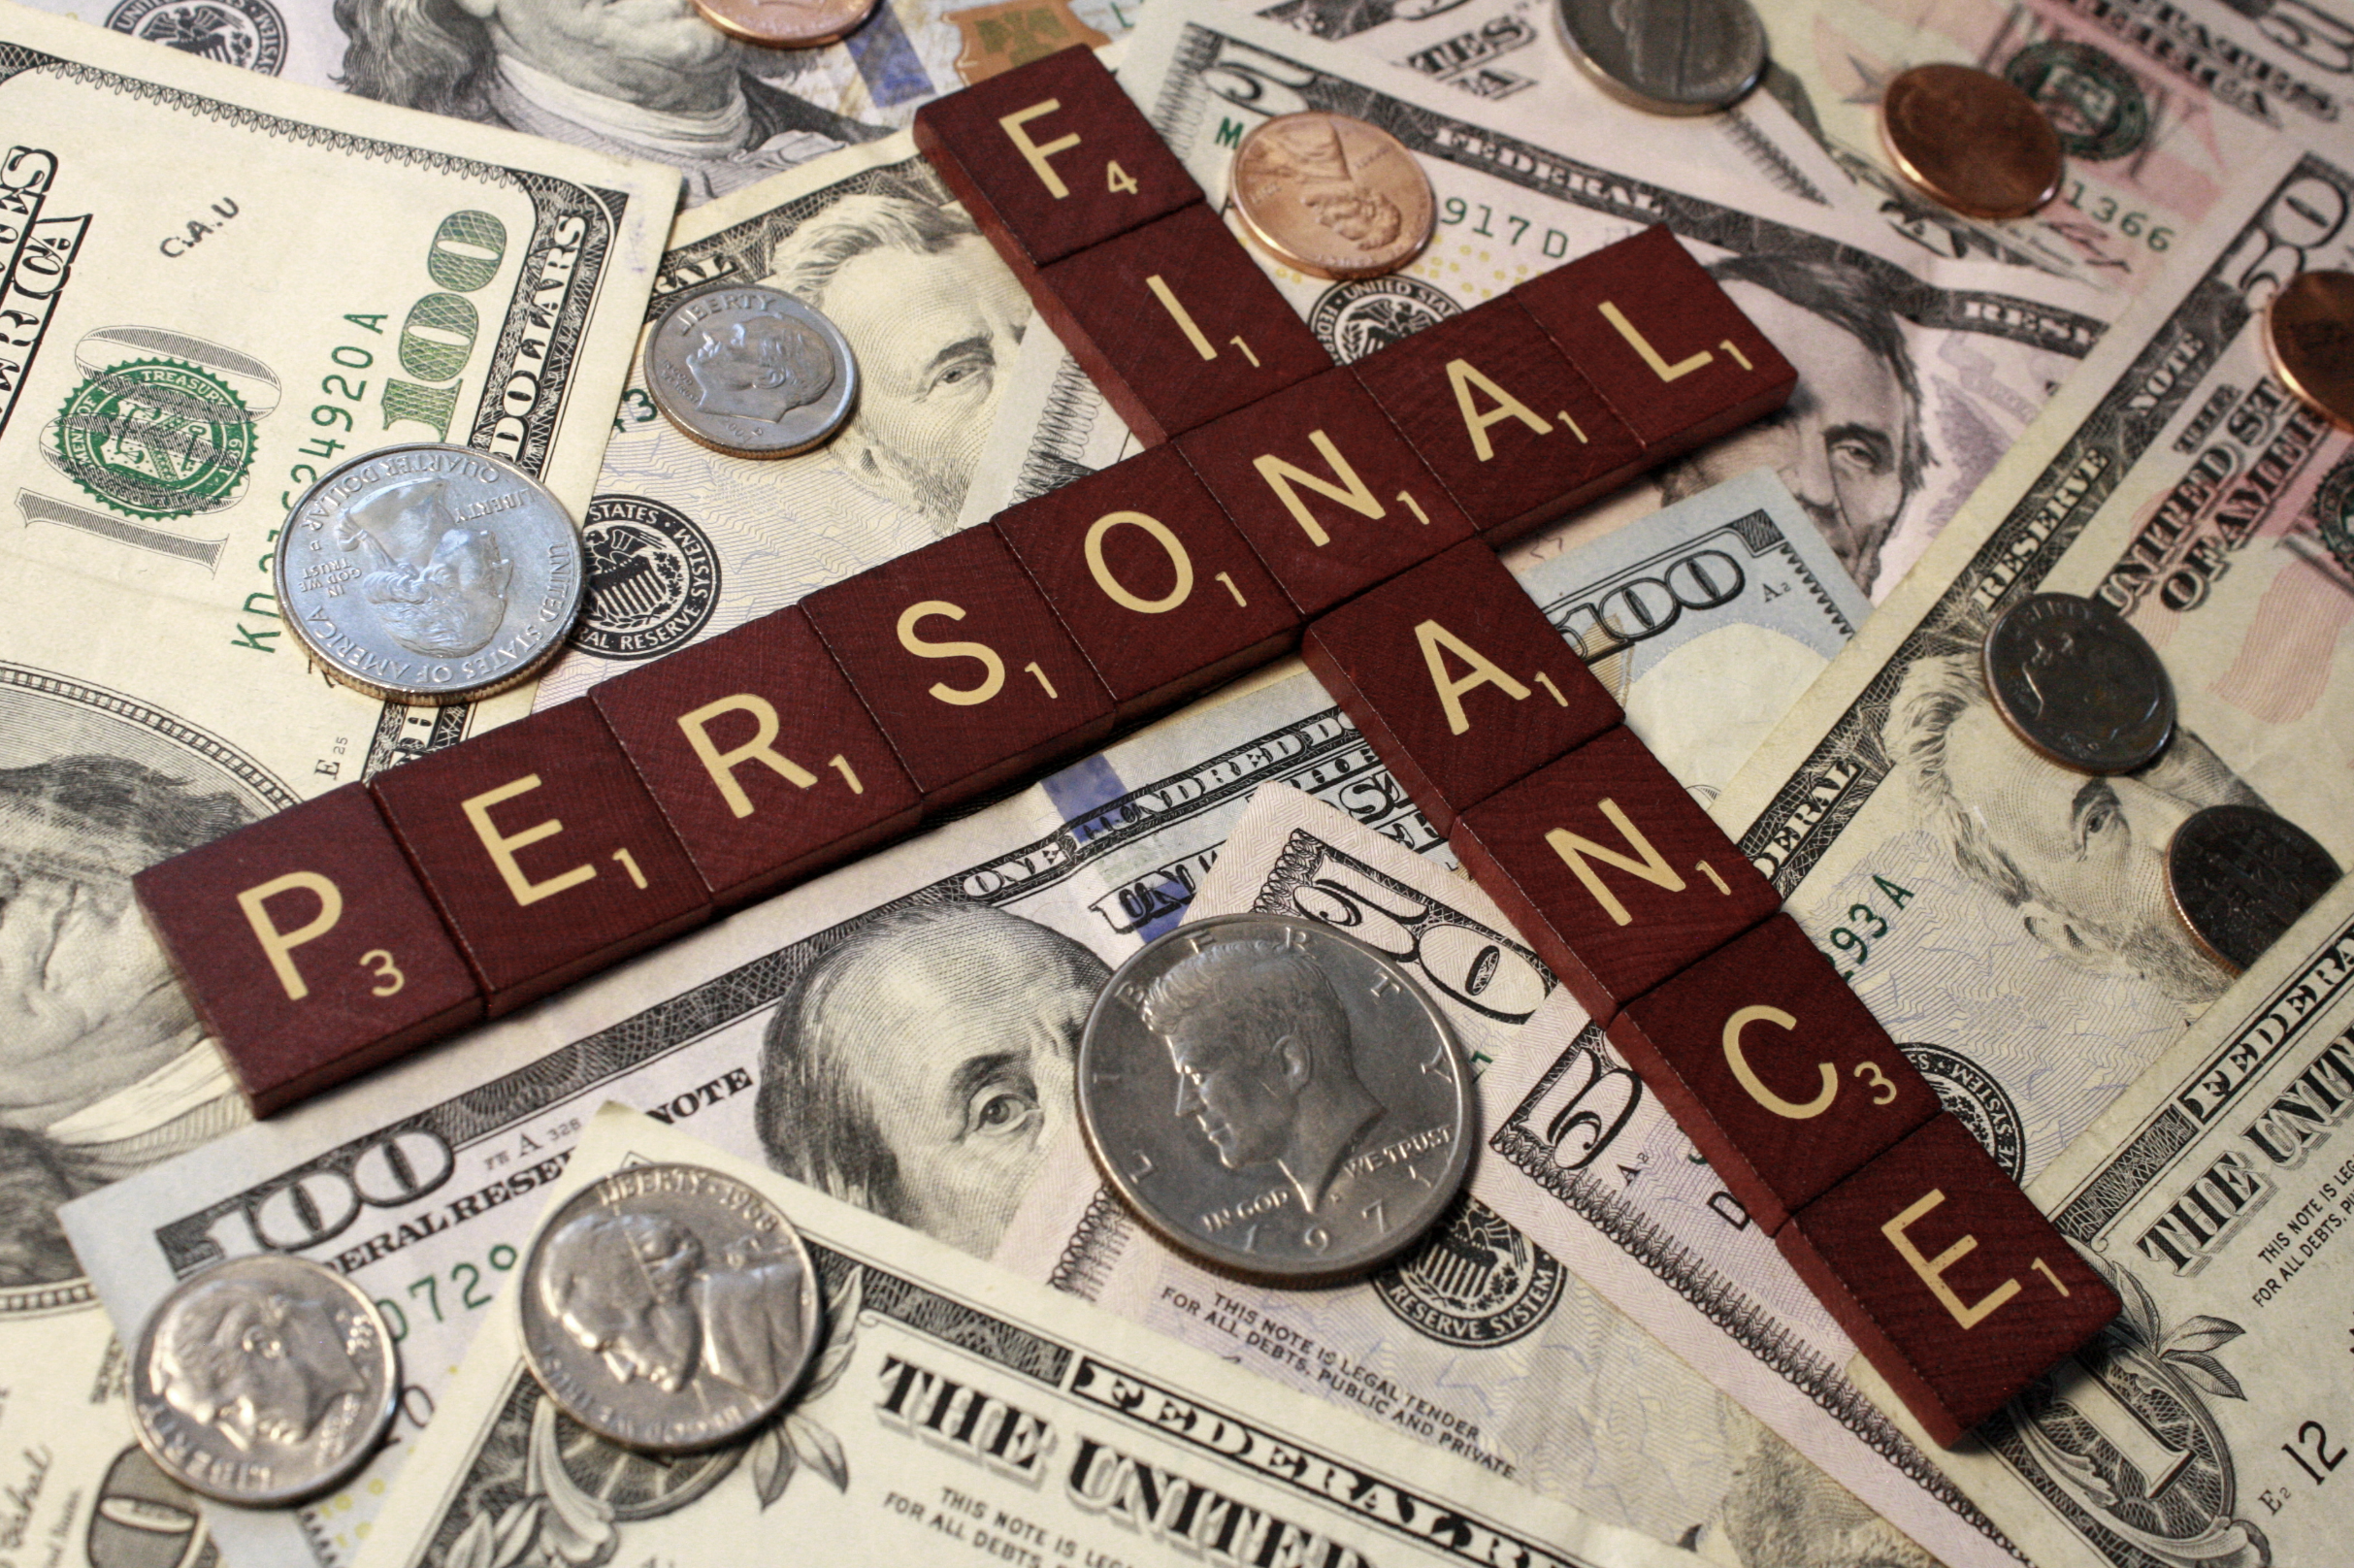 Scrabble tiles criss-cross and read "Personal Finance" and are laying on top of U.S. money. Personal finance blog concept.